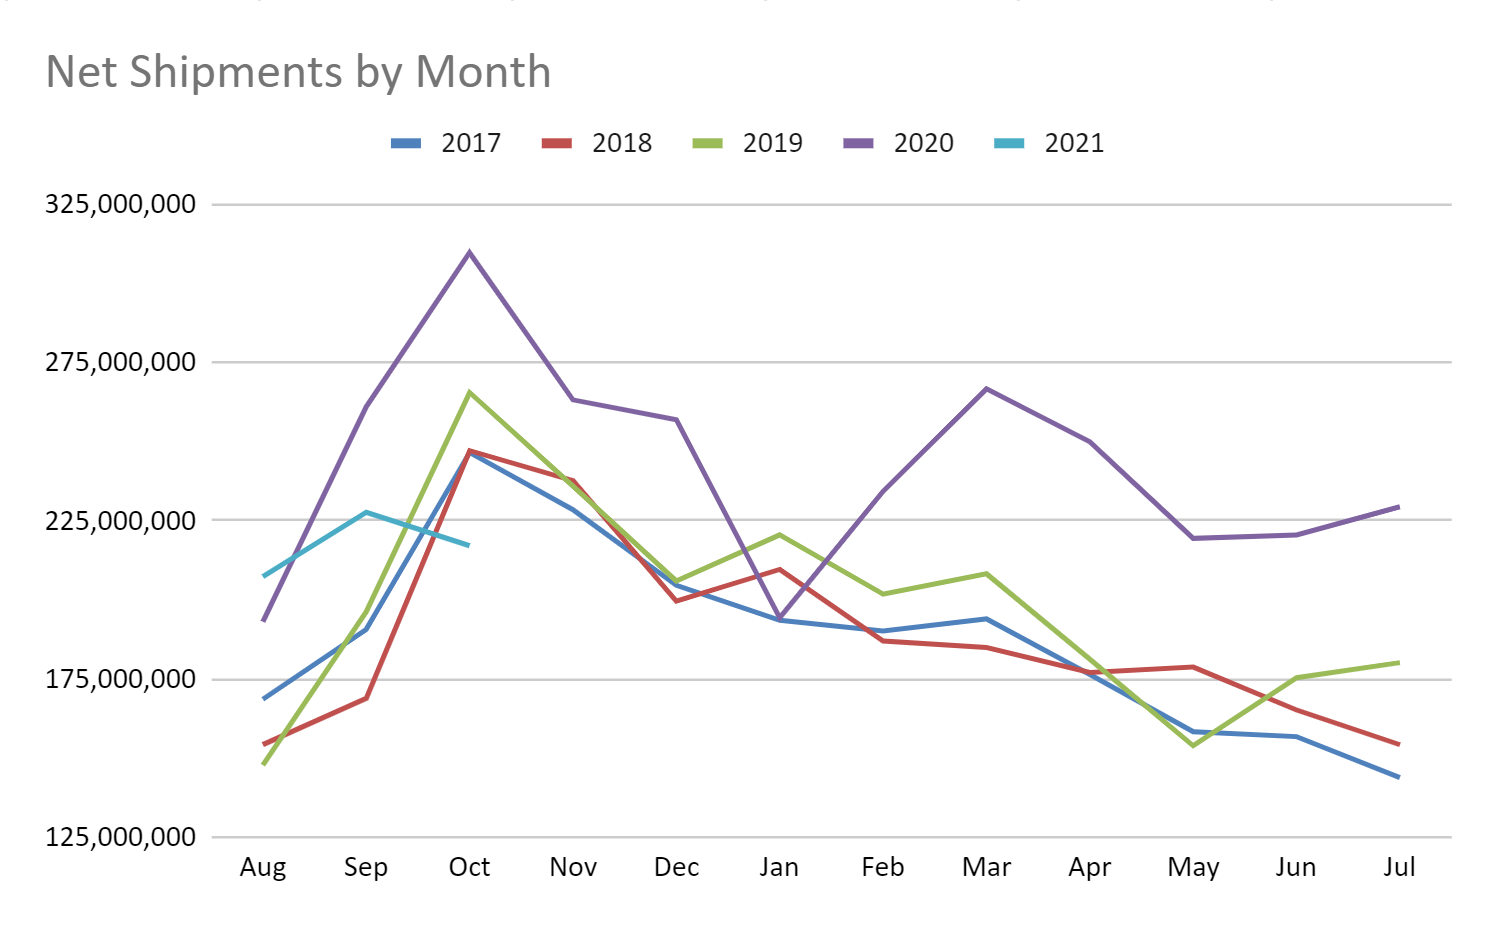 Net Shipments by Month